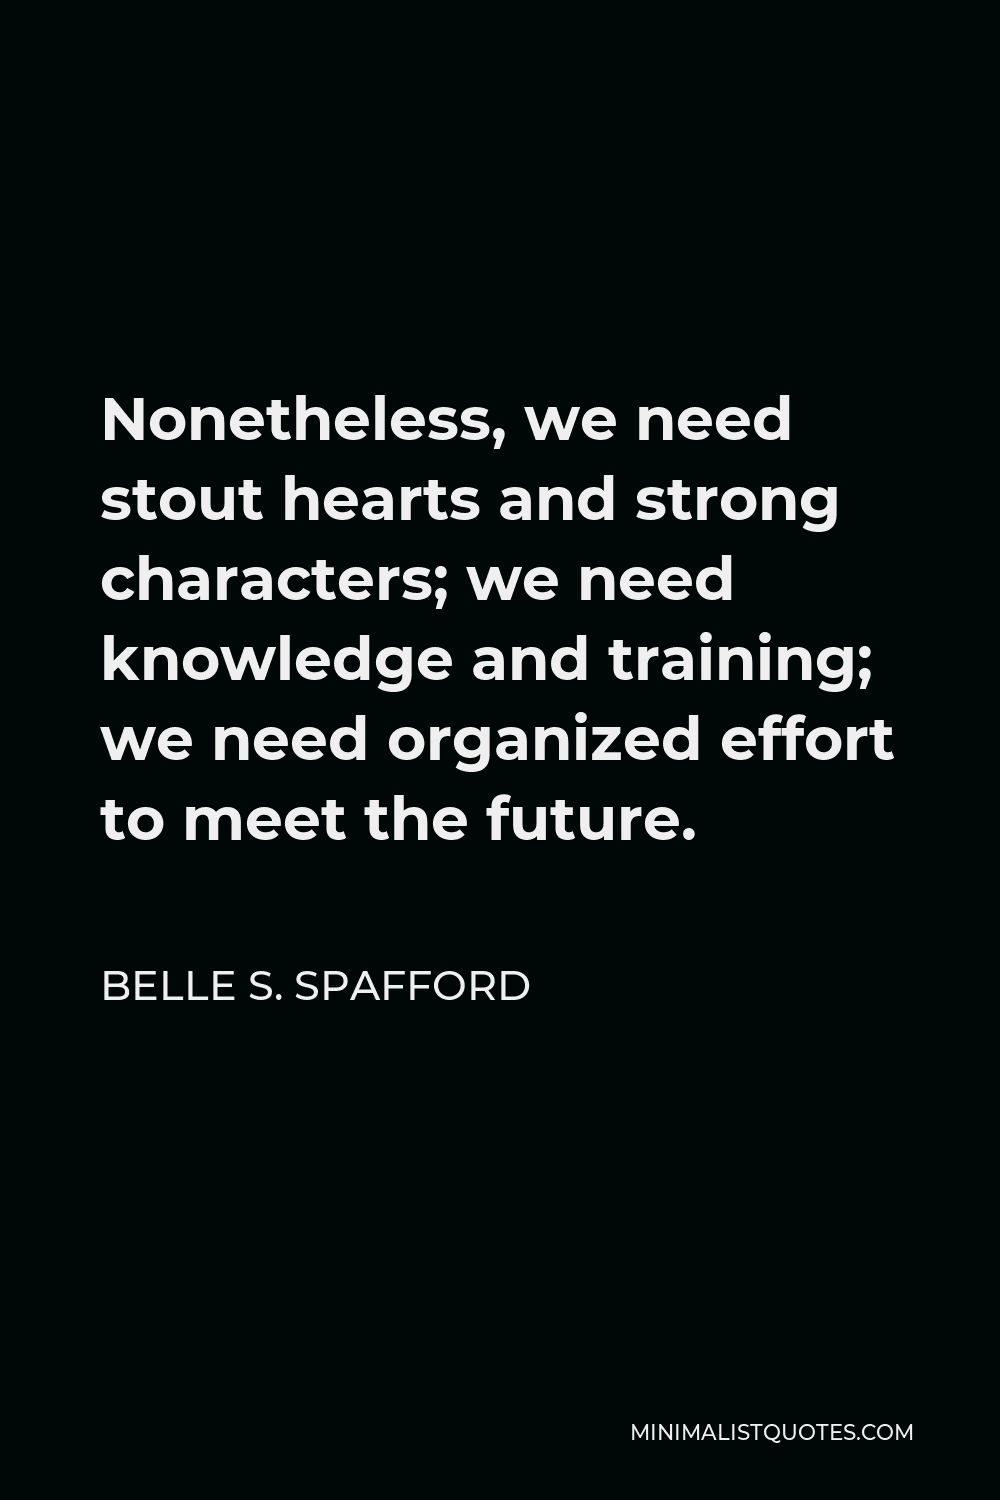 Belle S. Spafford Quote - Nonetheless, we need stout hearts and strong characters; we need knowledge and training; we need organized effort to meet the future.